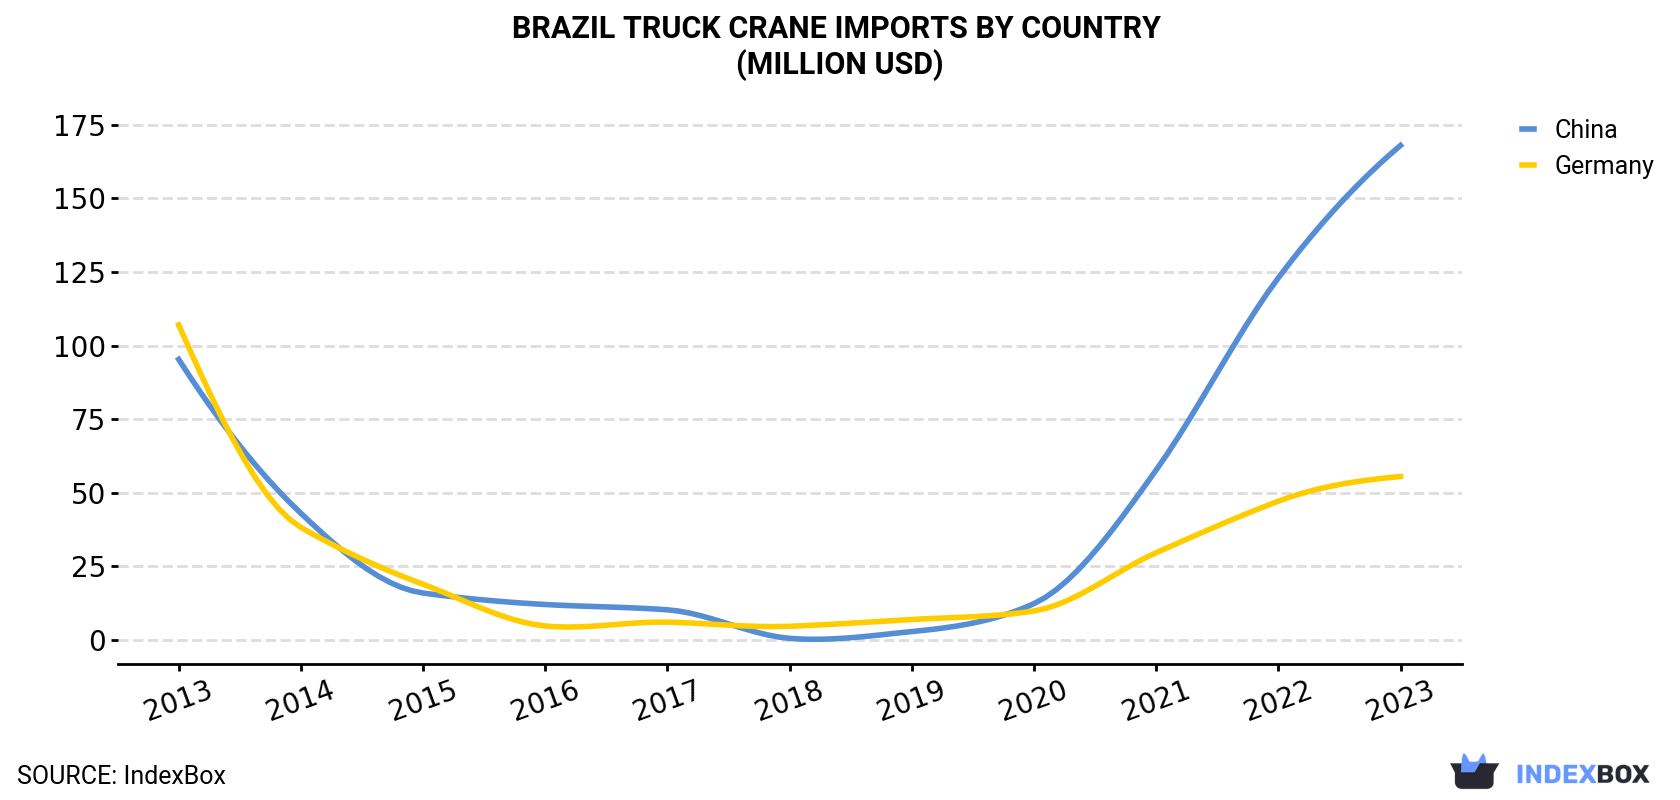 Brazil Truck Crane Imports By Country (Million USD)